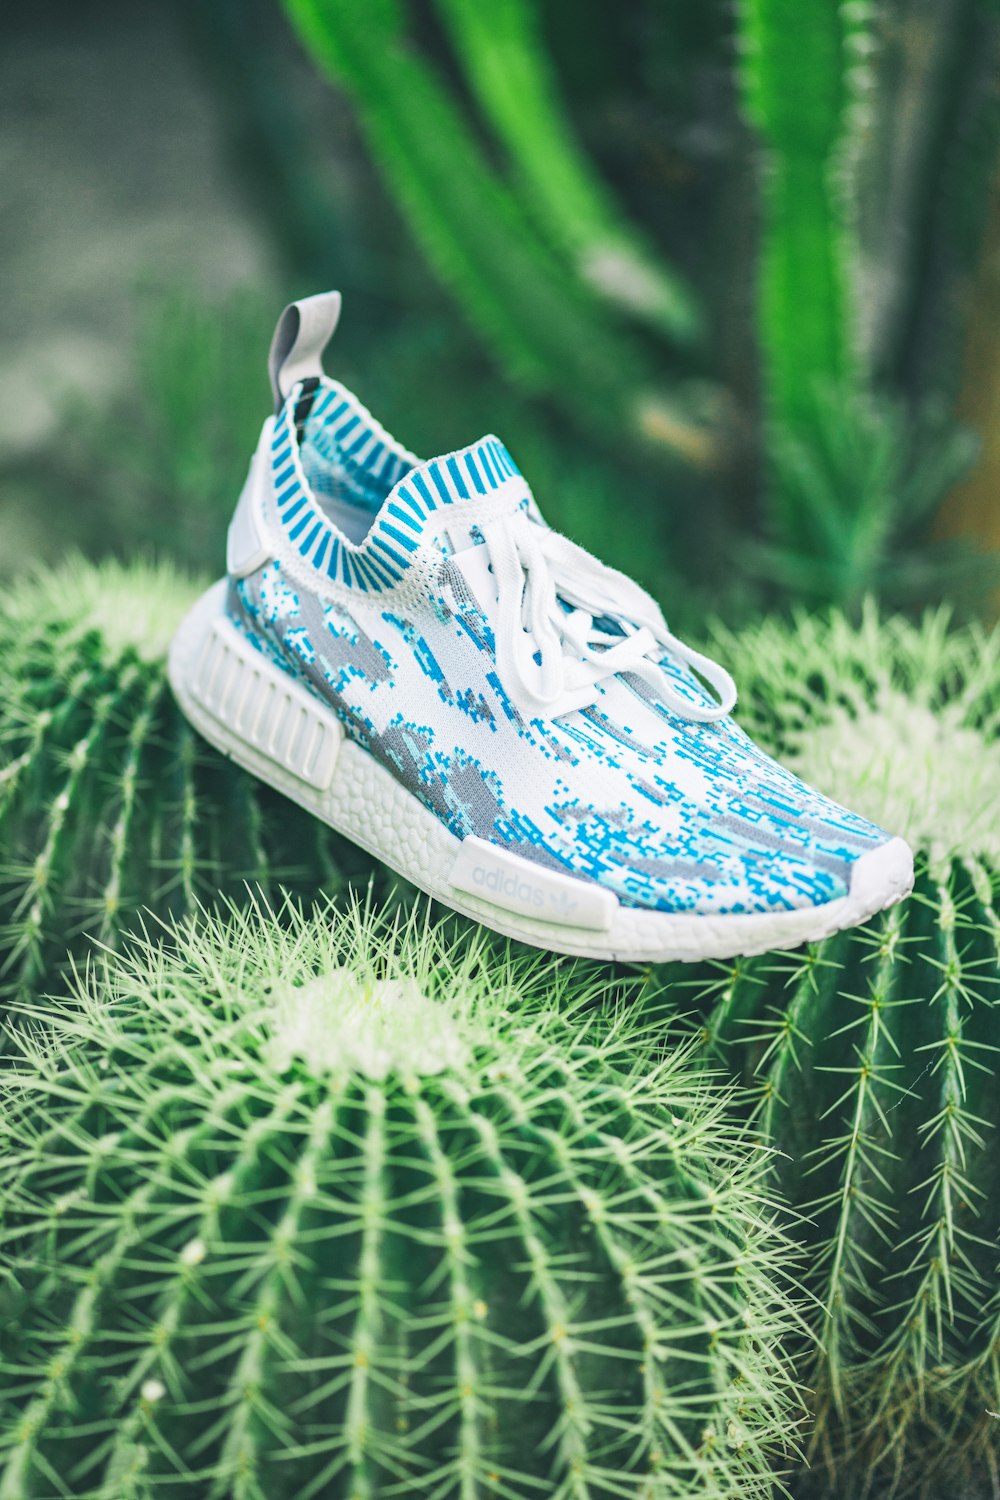 white and blue adidas NMD sneaker on cactus plant